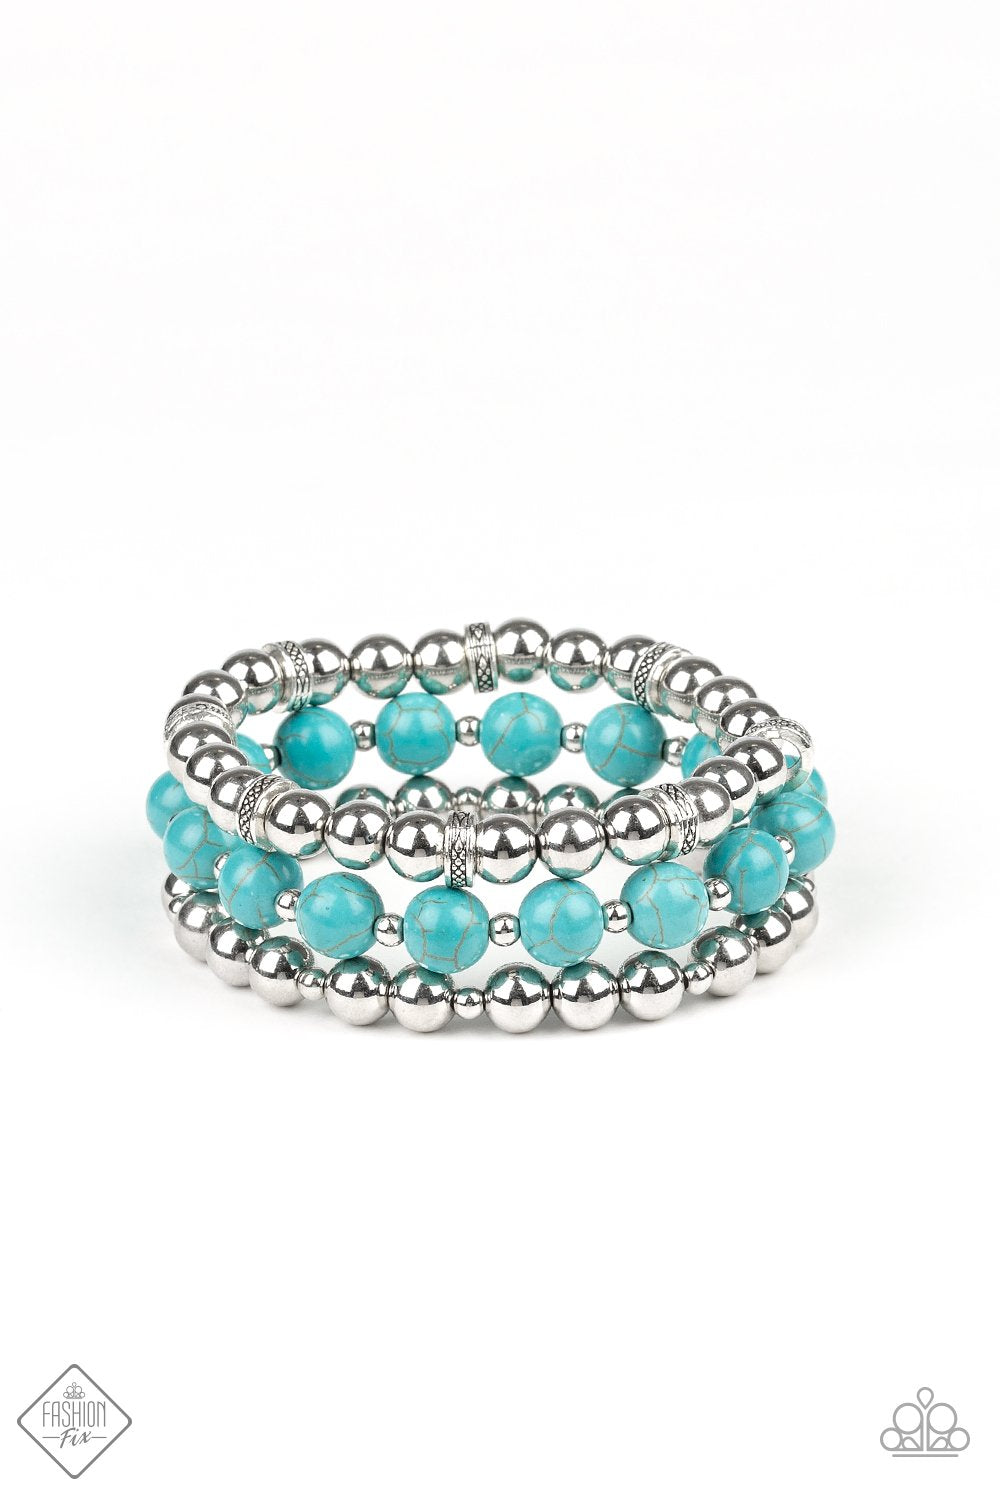 Sandstone Serendipity - Paparazzi - Blue Turquoise Stone and Silver Bead Stretchy Bracelet